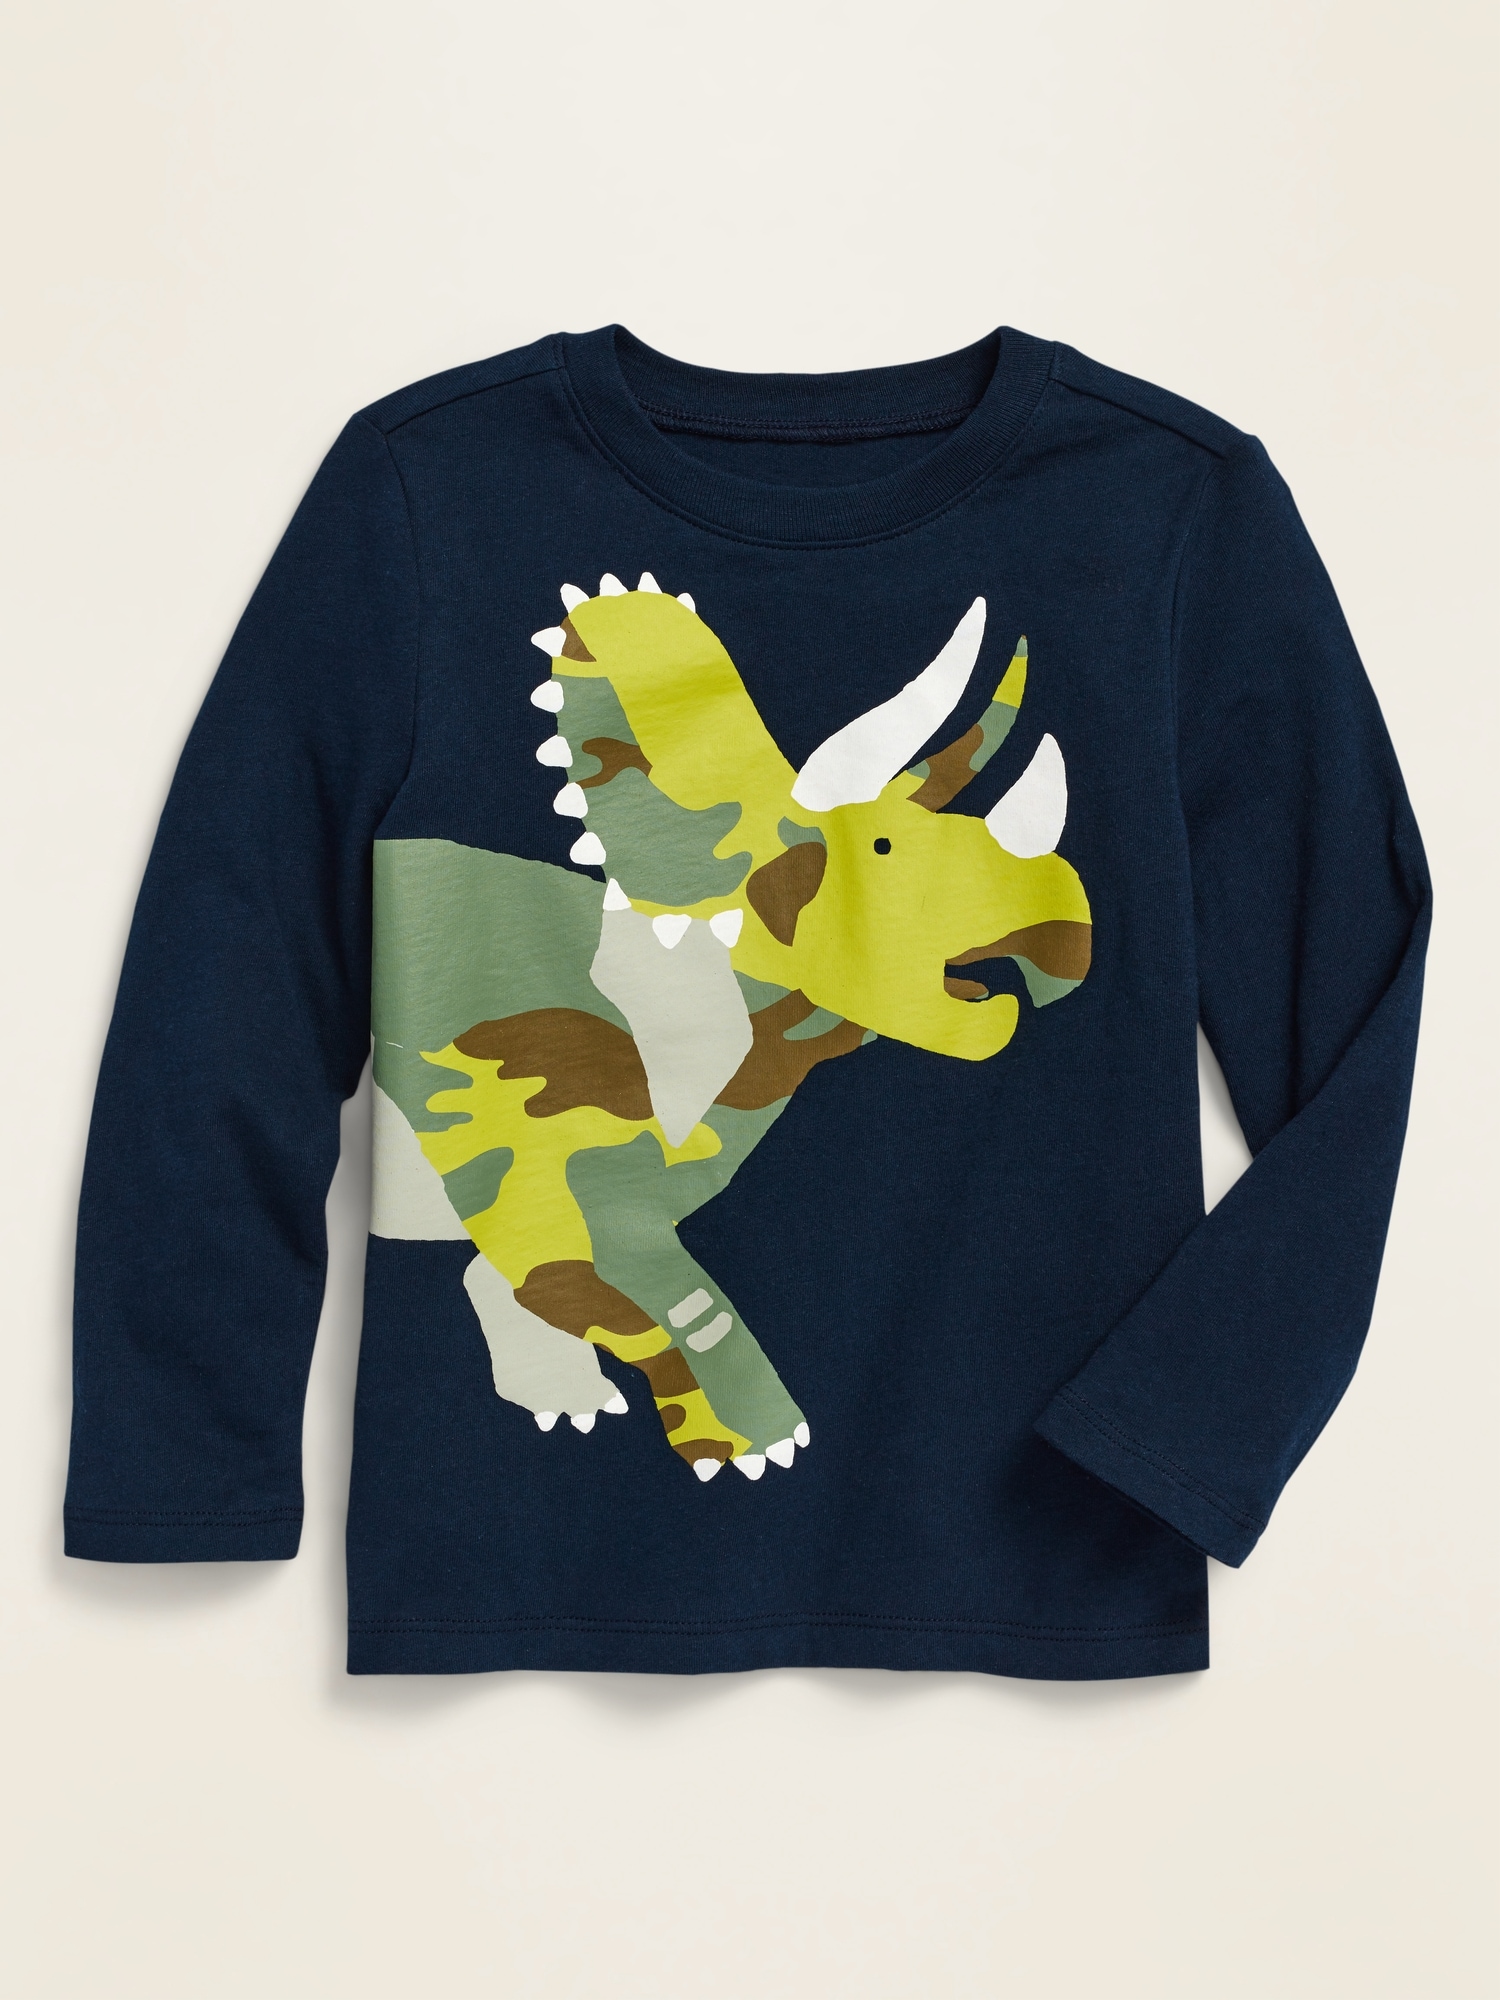 Unisex Graphic Long-Sleeve Tee for Toddler